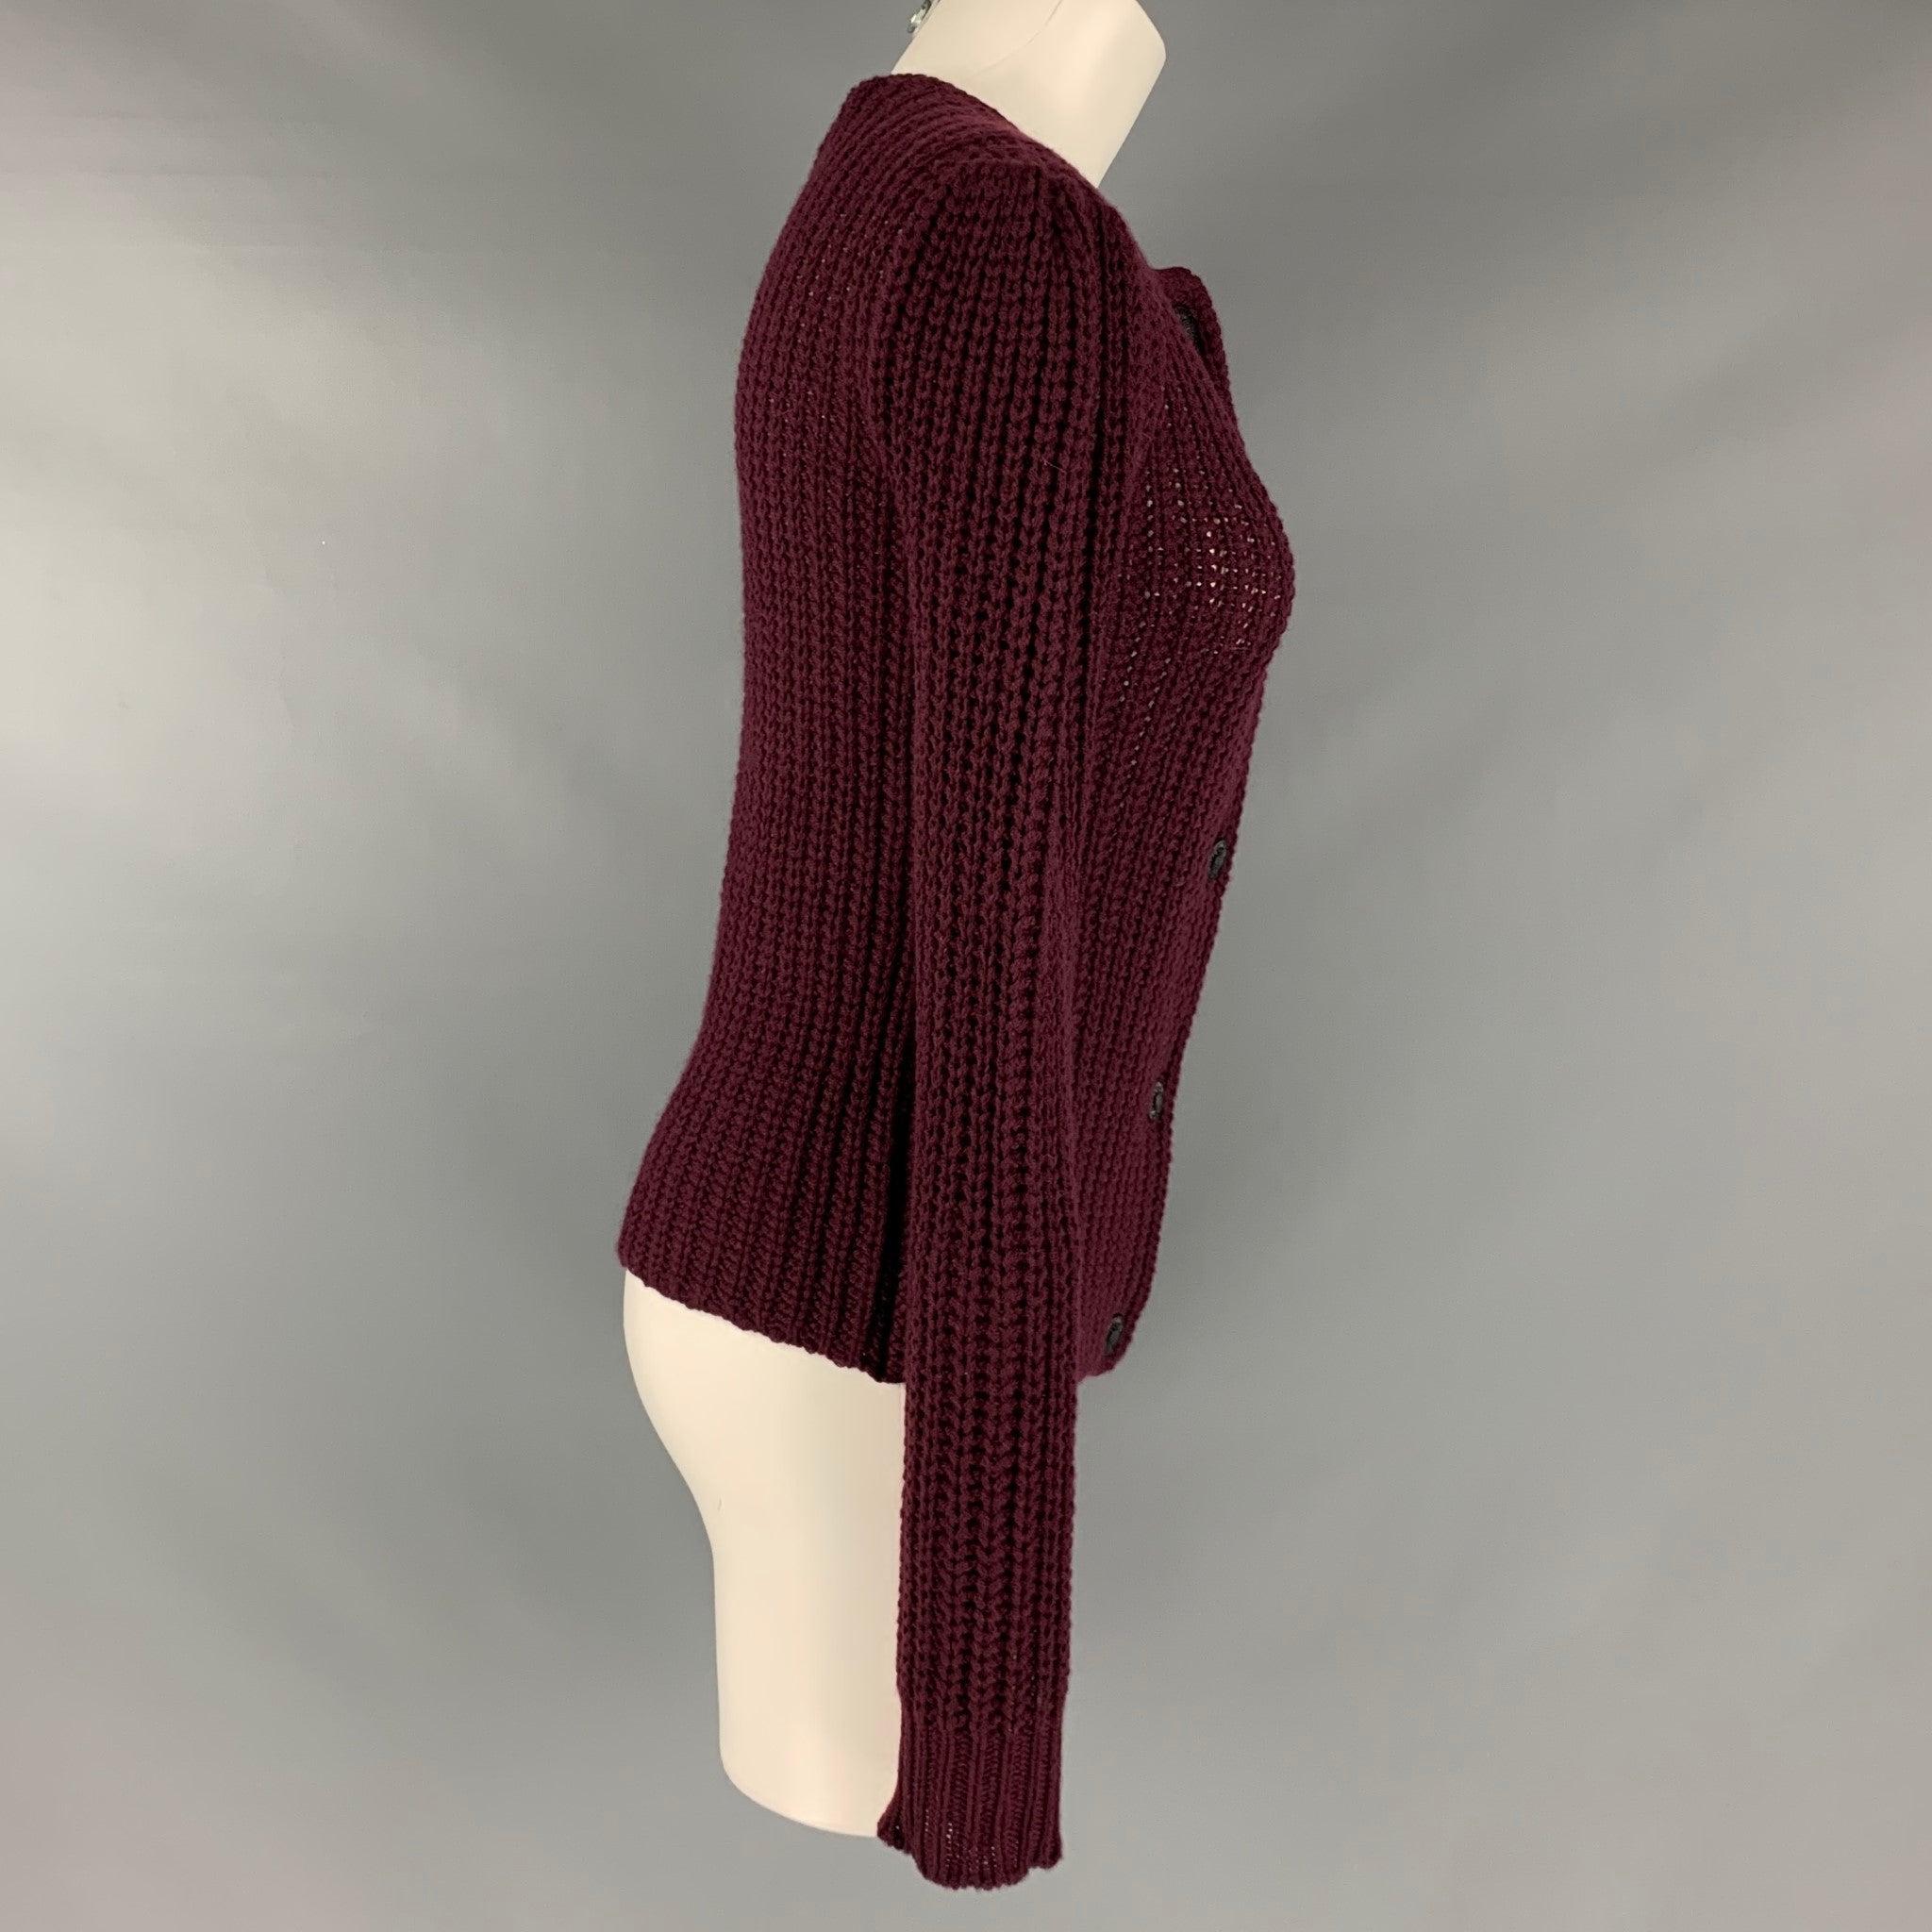 RALPH LAUREN Size S Burgundy Cashmere Cardigan In Excellent Condition For Sale In San Francisco, CA